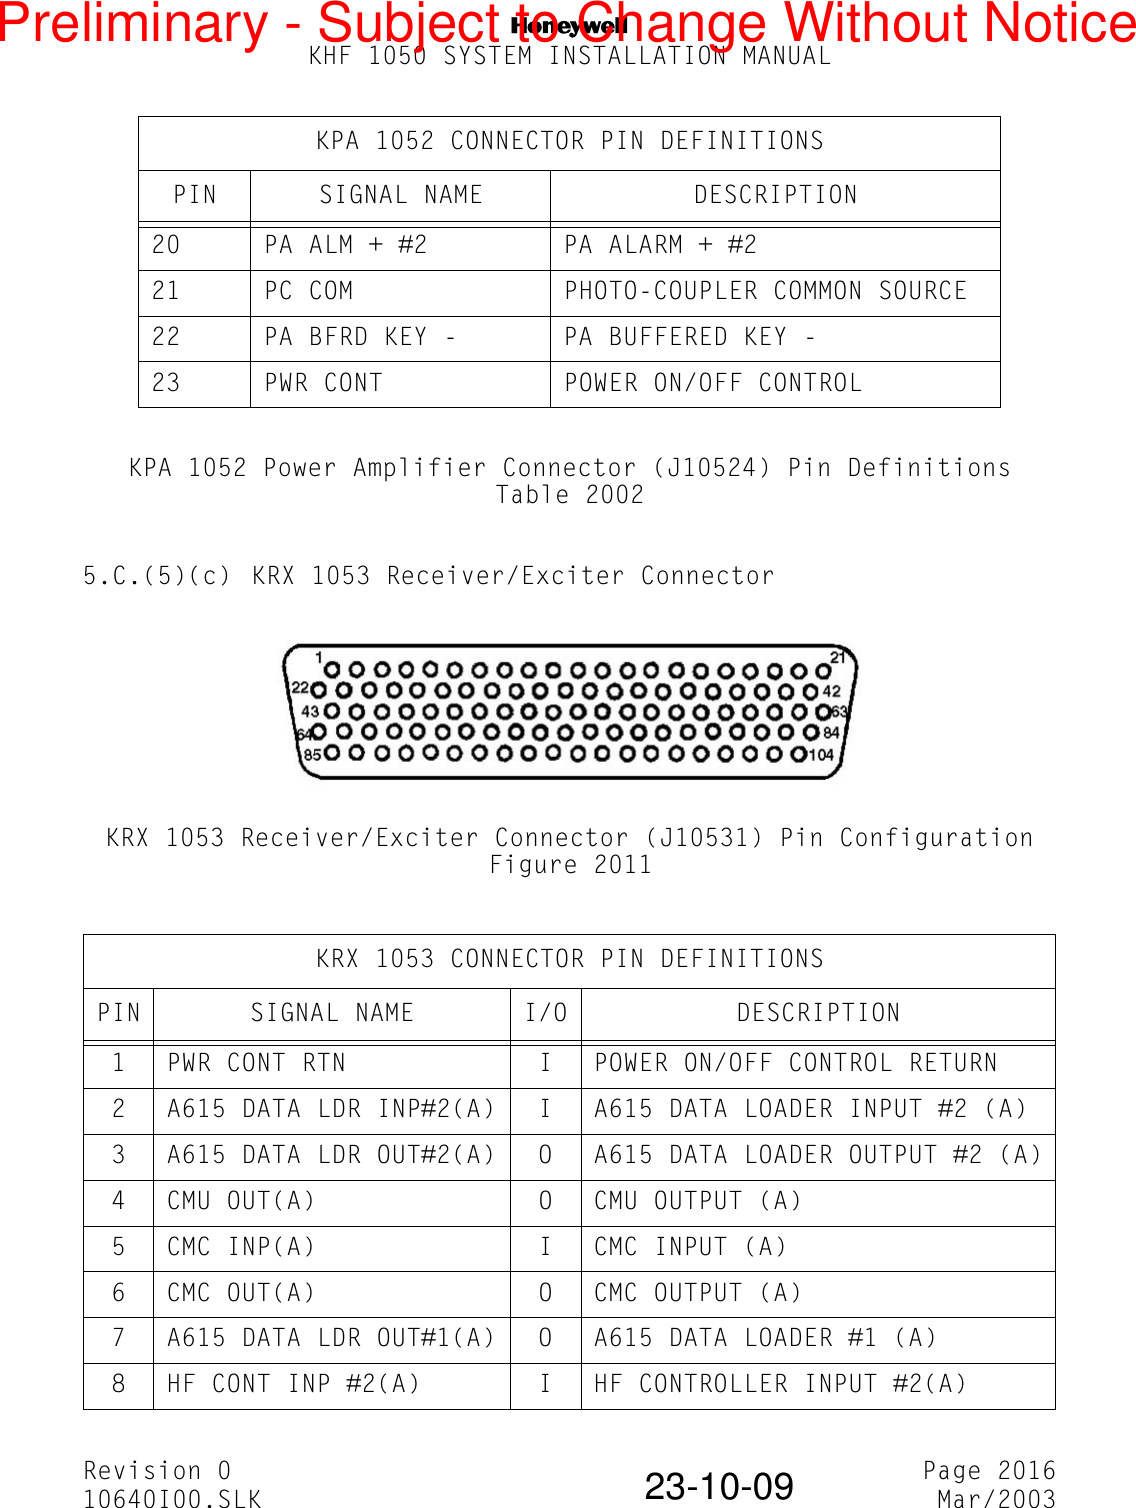 NKHF 1050 SYSTEM INSTALLATION MANUALRevision 0 Page 201610640I00.SLK Mar/200323-10-09KPA 1052 Power Amplifier Connector (J10524) Pin DefinitionsTable 20025.C.(5)(c) KRX 1053 Receiver/Exciter ConnectorKRX 1053 Receiver/Exciter Connector (J10531) Pin ConfigurationFigure 201120 PA ALM + #2 PA ALARM + #221 PC COM PHOTO-COUPLER COMMON SOURCE22 PA BFRD KEY - PA BUFFERED KEY -23 PWR CONT POWER ON/OFF CONTROLKRX 1053 CONNECTOR PIN DEFINITIONSPIN SIGNAL NAME I/O DESCRIPTION1 PWR CONT RTN I POWER ON/OFF CONTROL RETURN2 A615 DATA LDR INP#2(A) I A615 DATA LOADER INPUT #2 (A)3 A615 DATA LDR OUT#2(A) O A615 DATA LOADER OUTPUT #2 (A)4 CMU OUT(A) O CMU OUTPUT (A)5 CMC INP(A) I CMC INPUT (A)6 CMC OUT(A) O CMC OUTPUT (A)7 A615 DATA LDR OUT#1(A) O A615 DATA LOADER #1 (A)8 HF CONT INP #2(A) I HF CONTROLLER INPUT #2(A)KPA 1052 CONNECTOR PIN DEFINITIONSPIN SIGNAL NAME DESCRIPTIONPreliminary - Subject to Change Without Notice